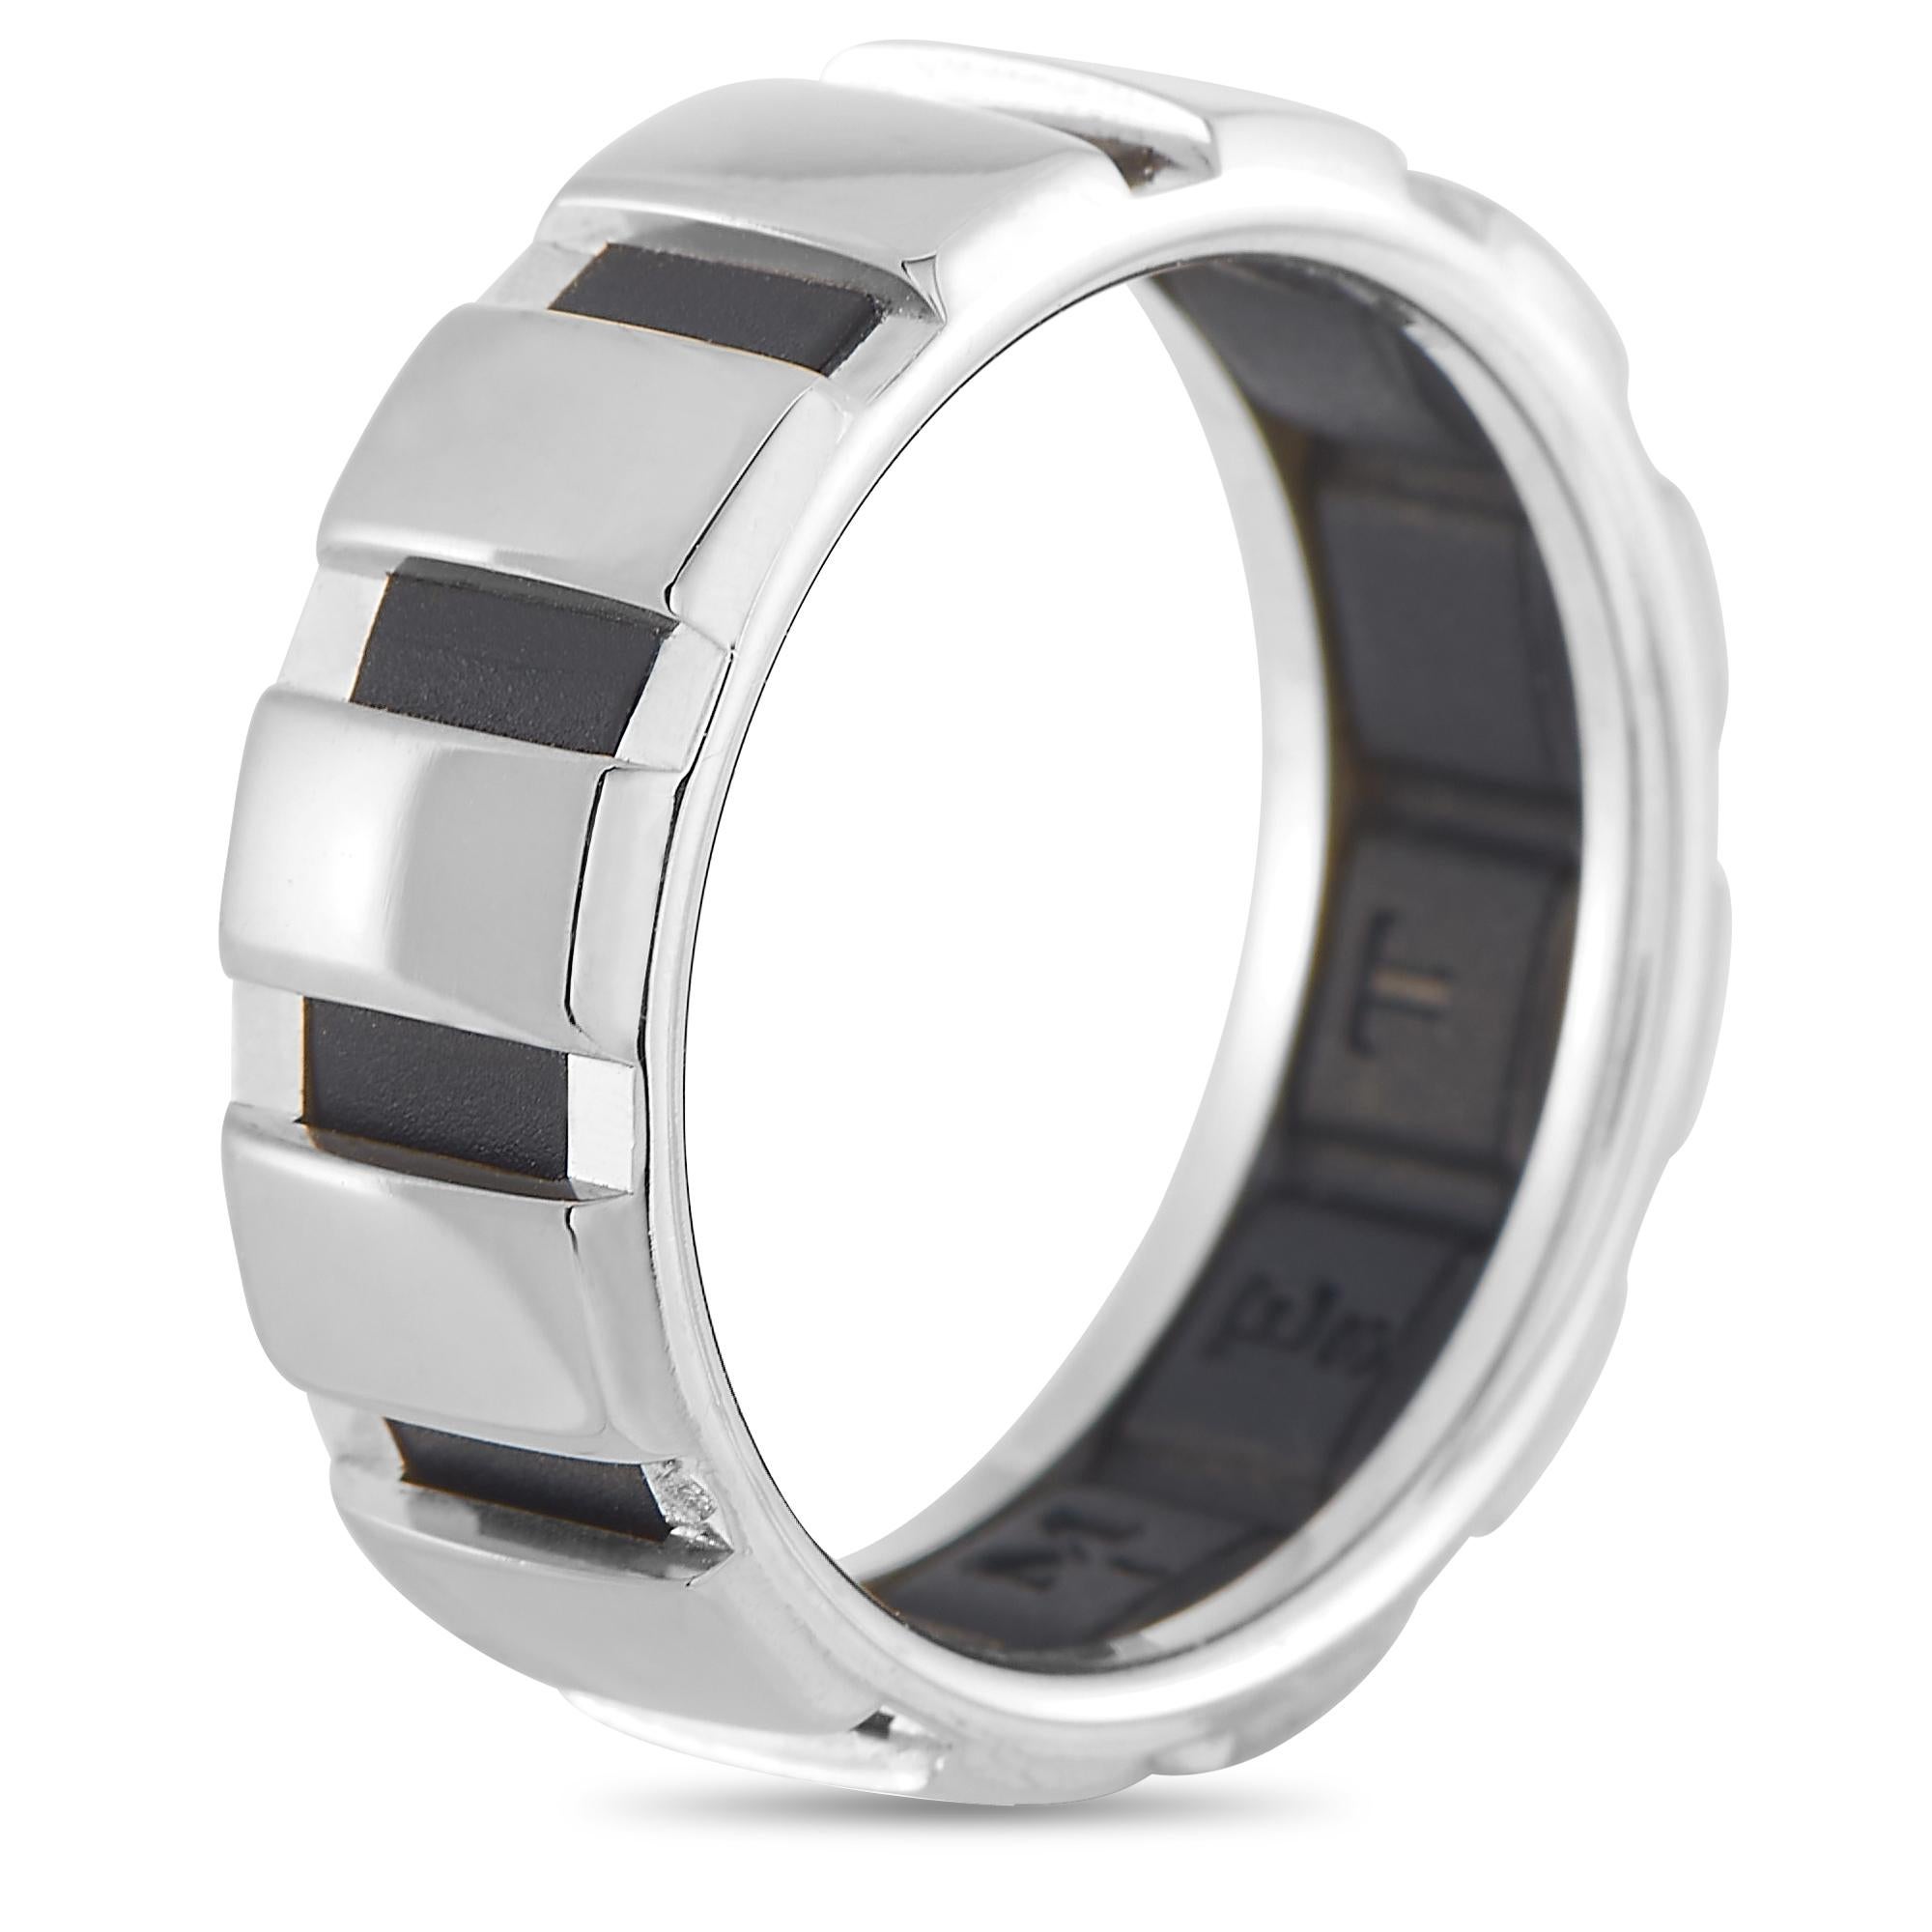 This Chaumet band ring is made out of 18K white gold and black rubber and weighs 6.3 grams, boasting band thickness of 6 mm.